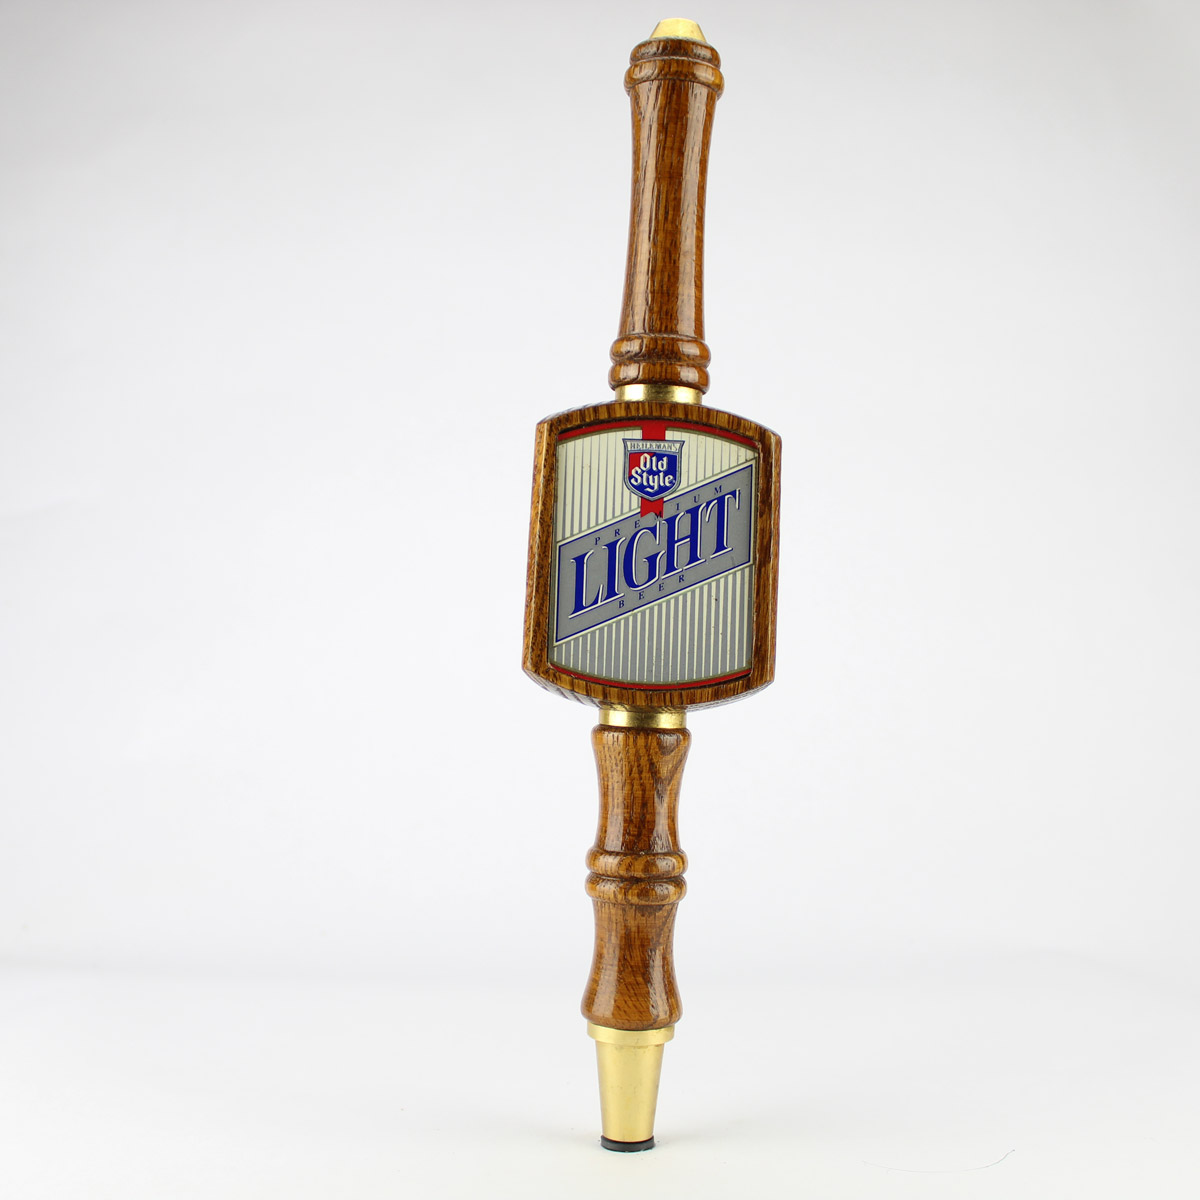 Heileman Old Style beer lighted sign, excellent condition